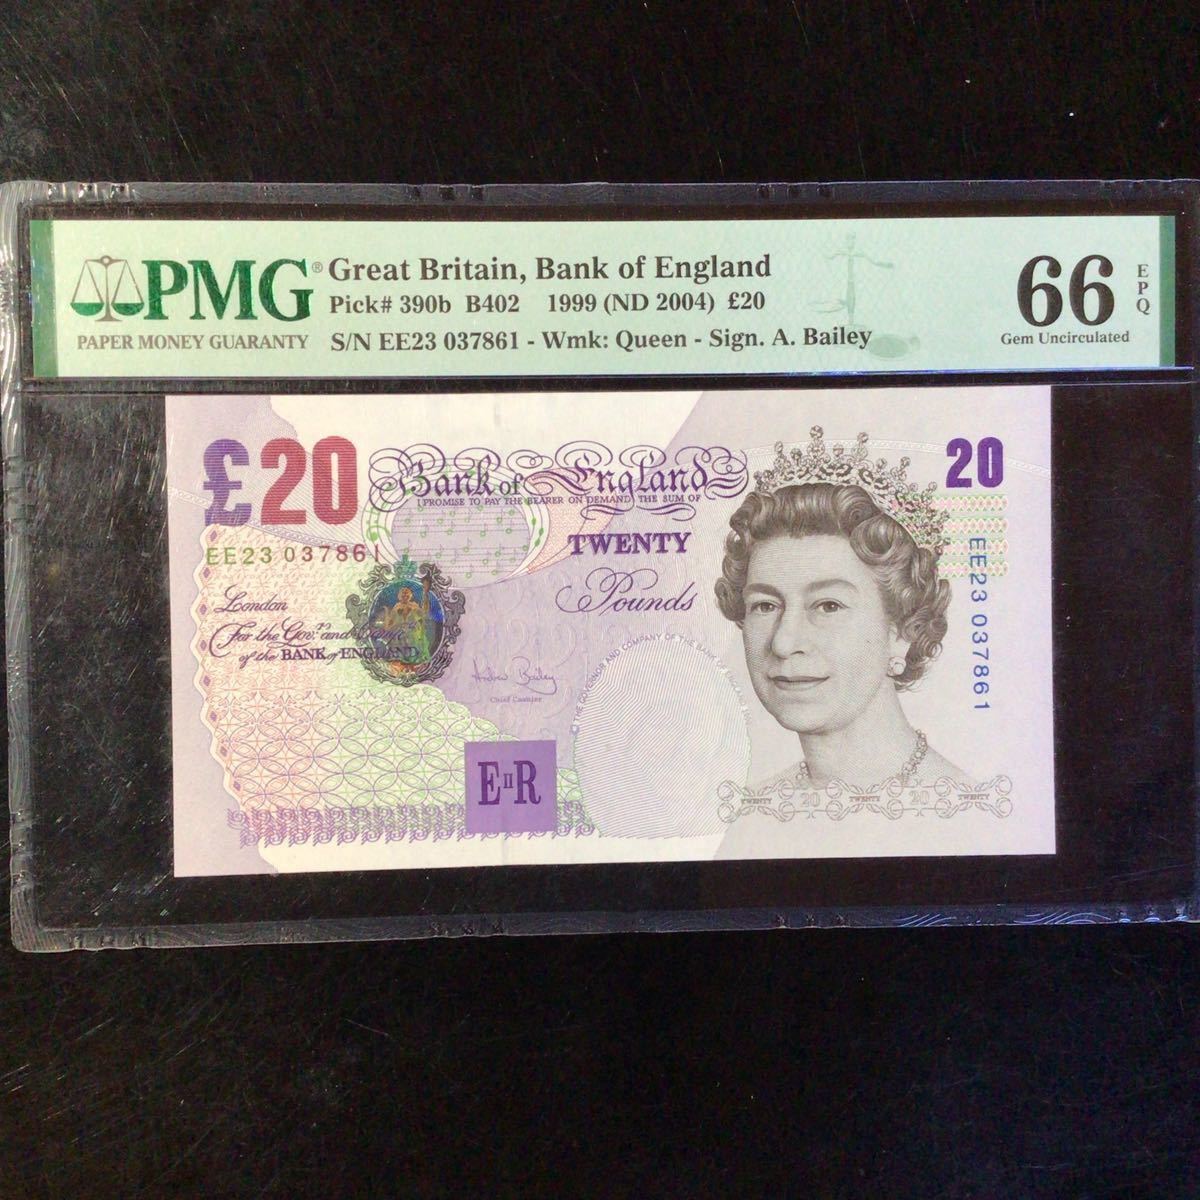 World Banknote Grading GREAT BRITAIN《Bank of England》20 Pounds【1999】『PMG Grading Gem Uncirculated 66 EPQ』